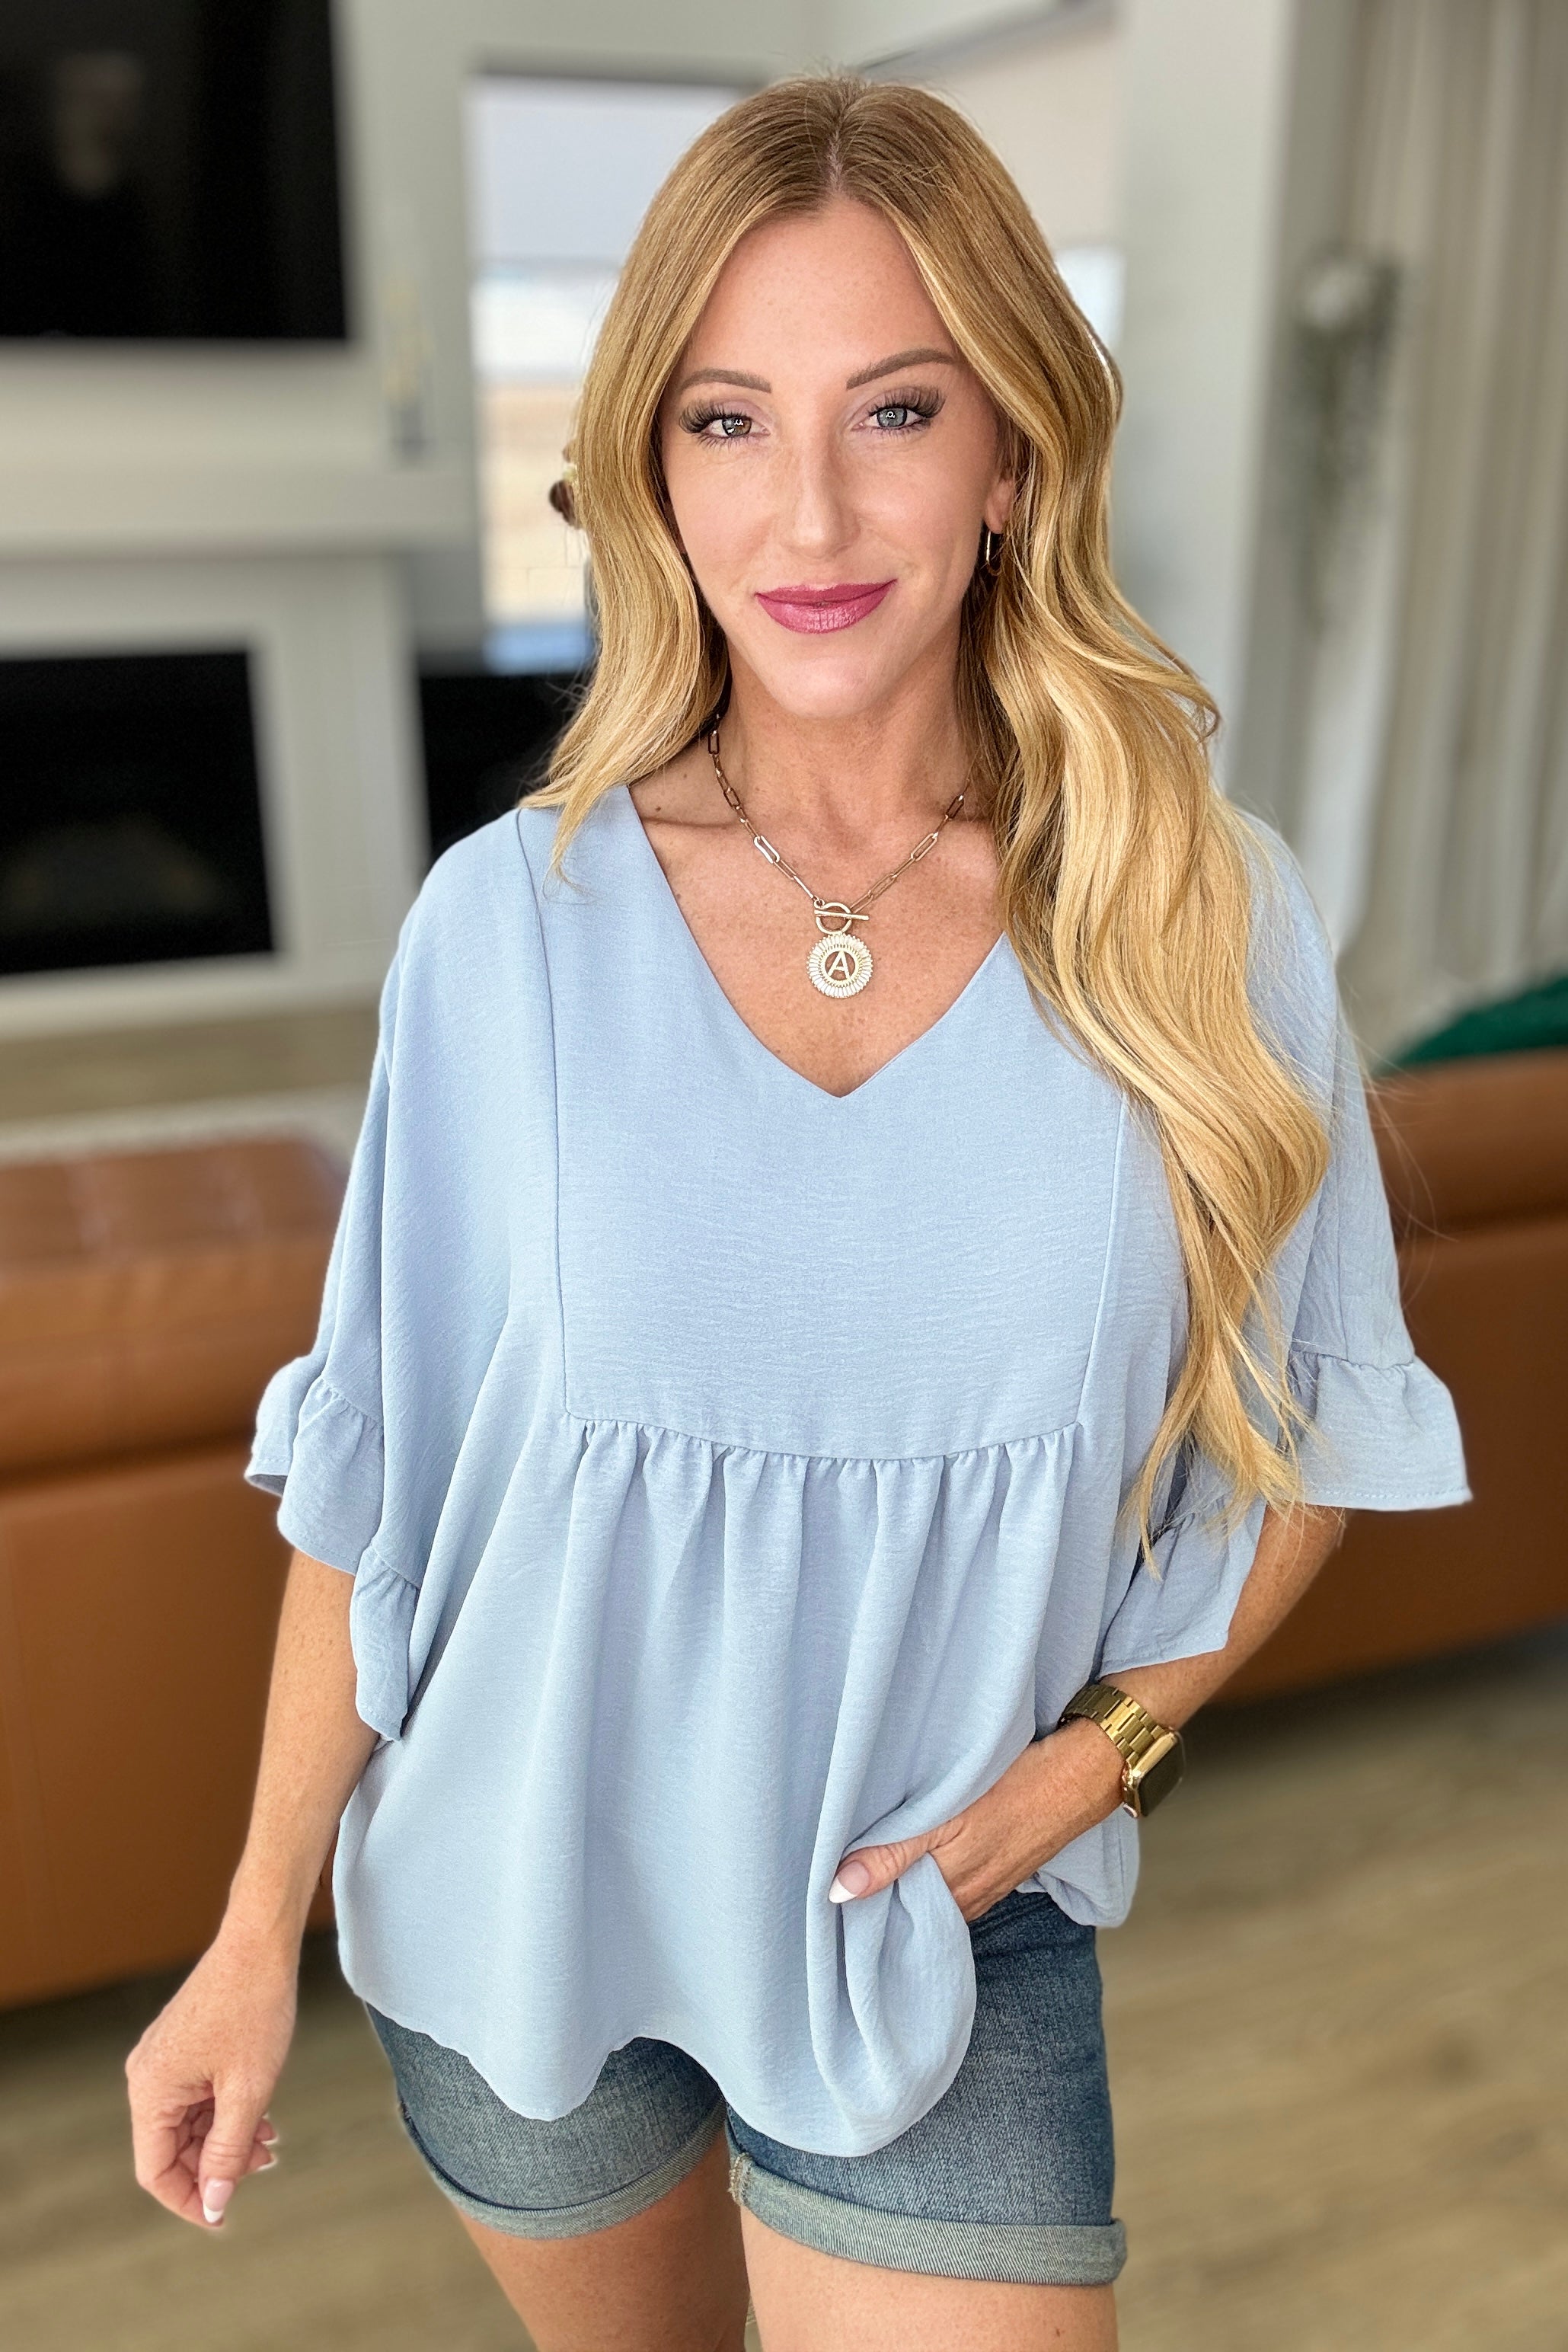 Airflow Peplum Ruffle Sleeve Top in Chambray Tops Ave Shops   